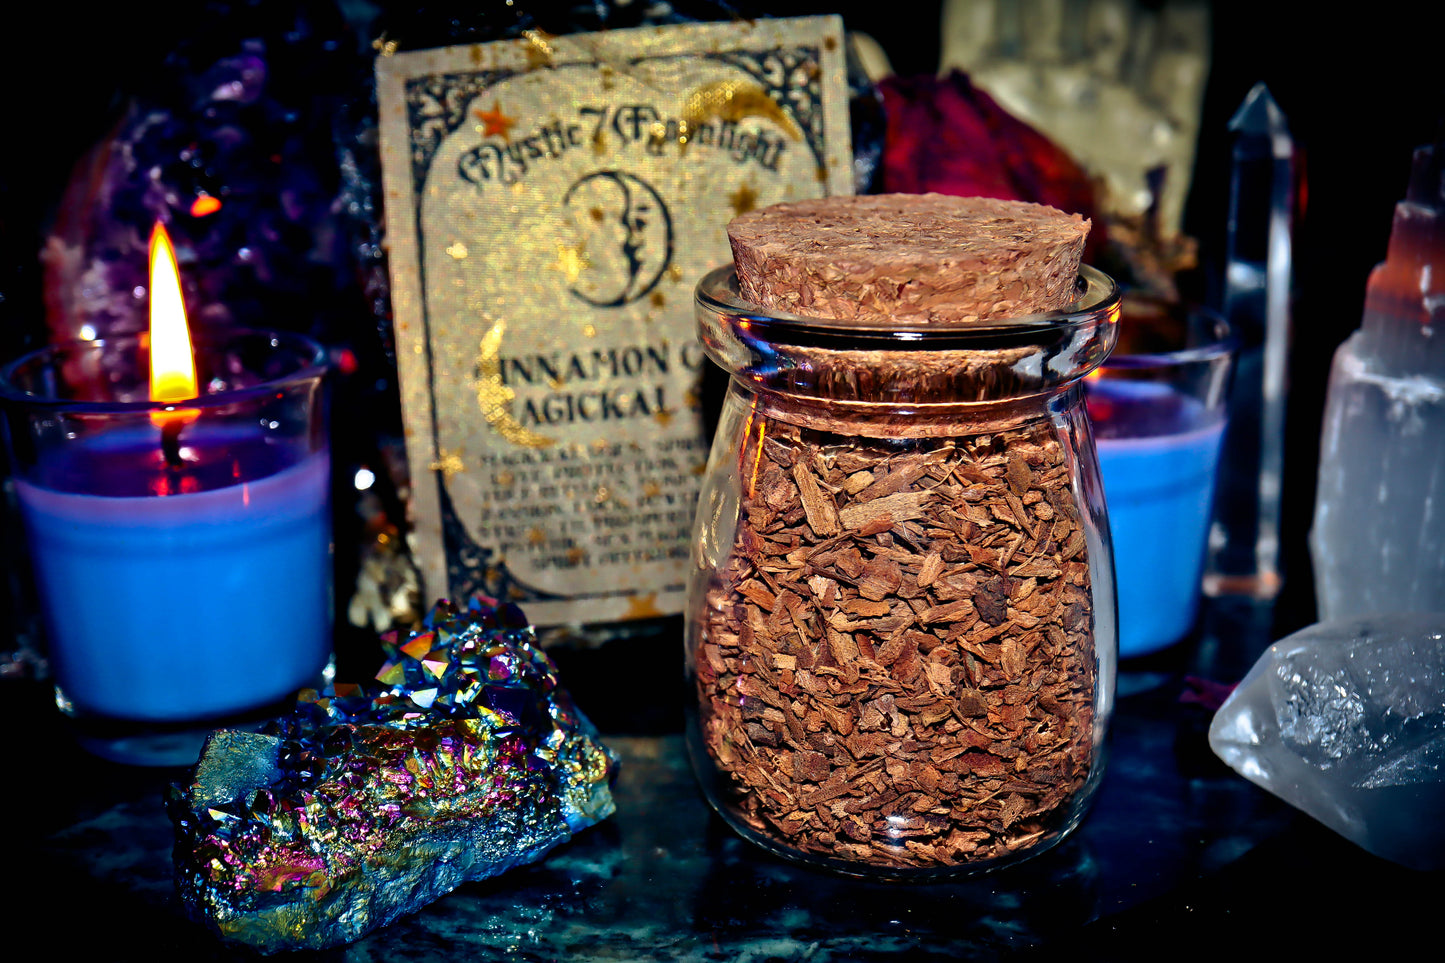 SWEET CINNAMON CHIPS Magick Spice Apothecary ~ Money Drawing & Wealth, Strength, Prosperity & More ~ Premium Apothecary Glass Bottle w/ Cork